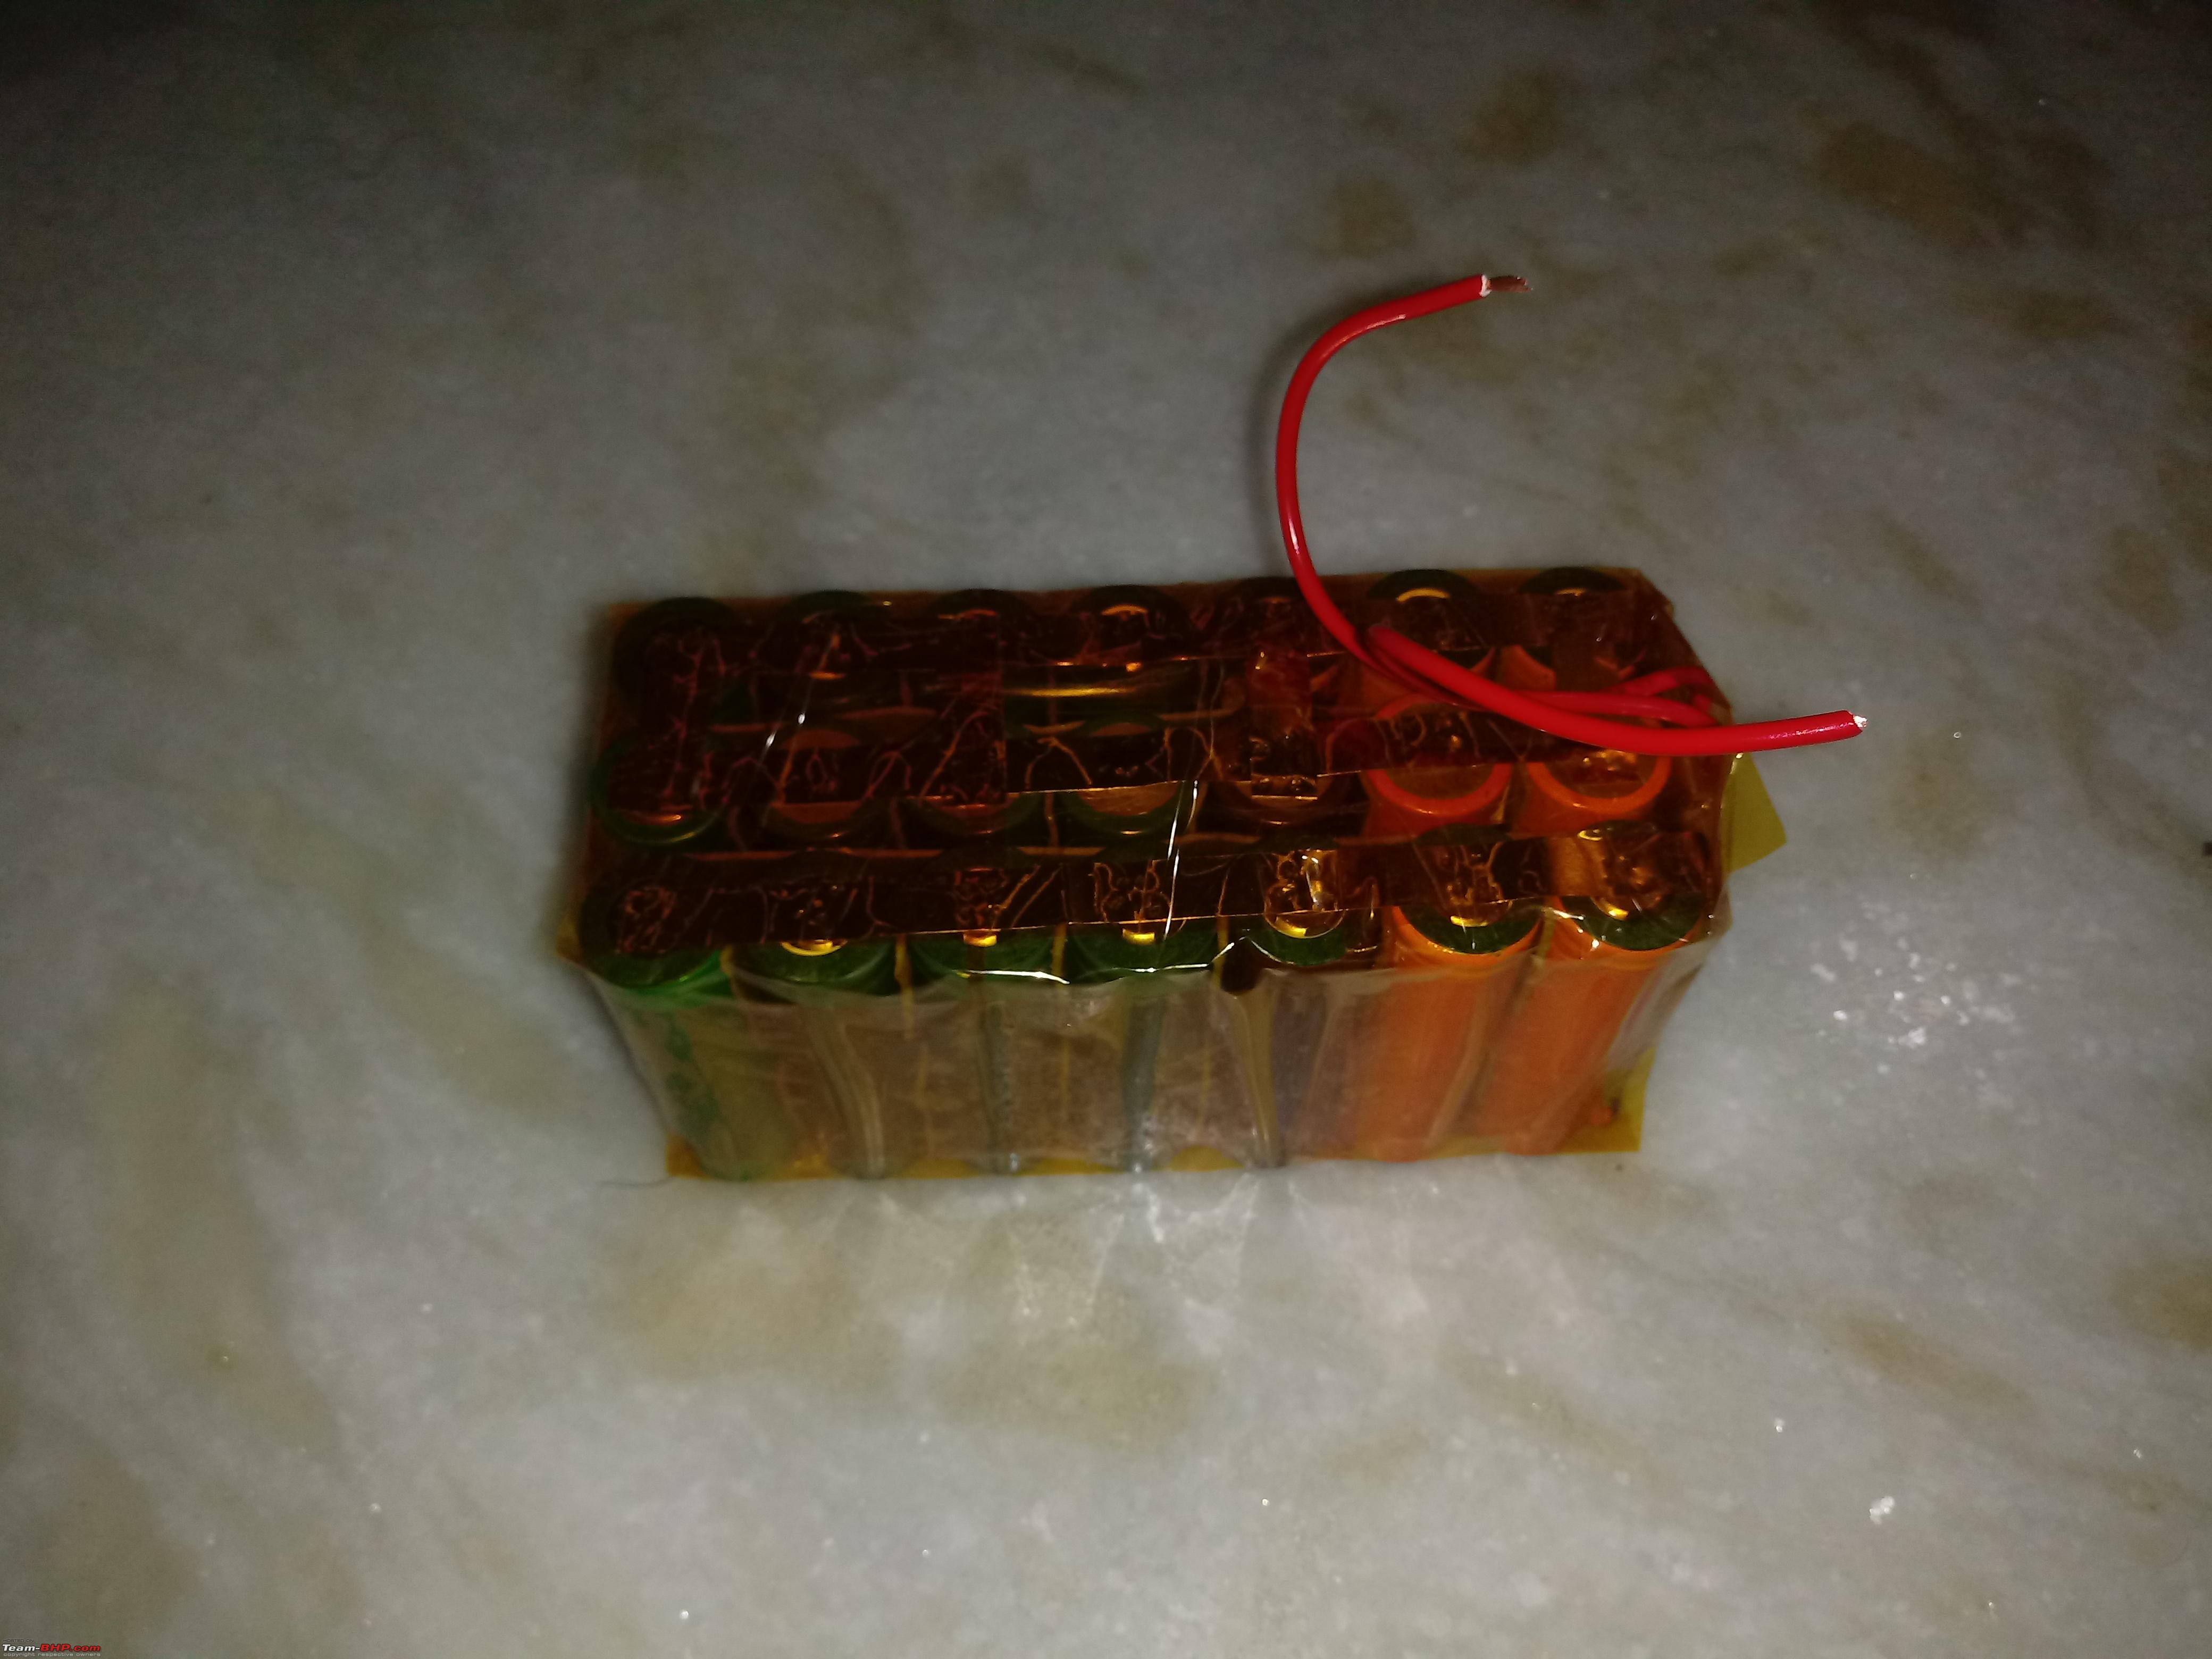 Designing a Simple 12V Li-Ion Battery Pack with Protection Circuit